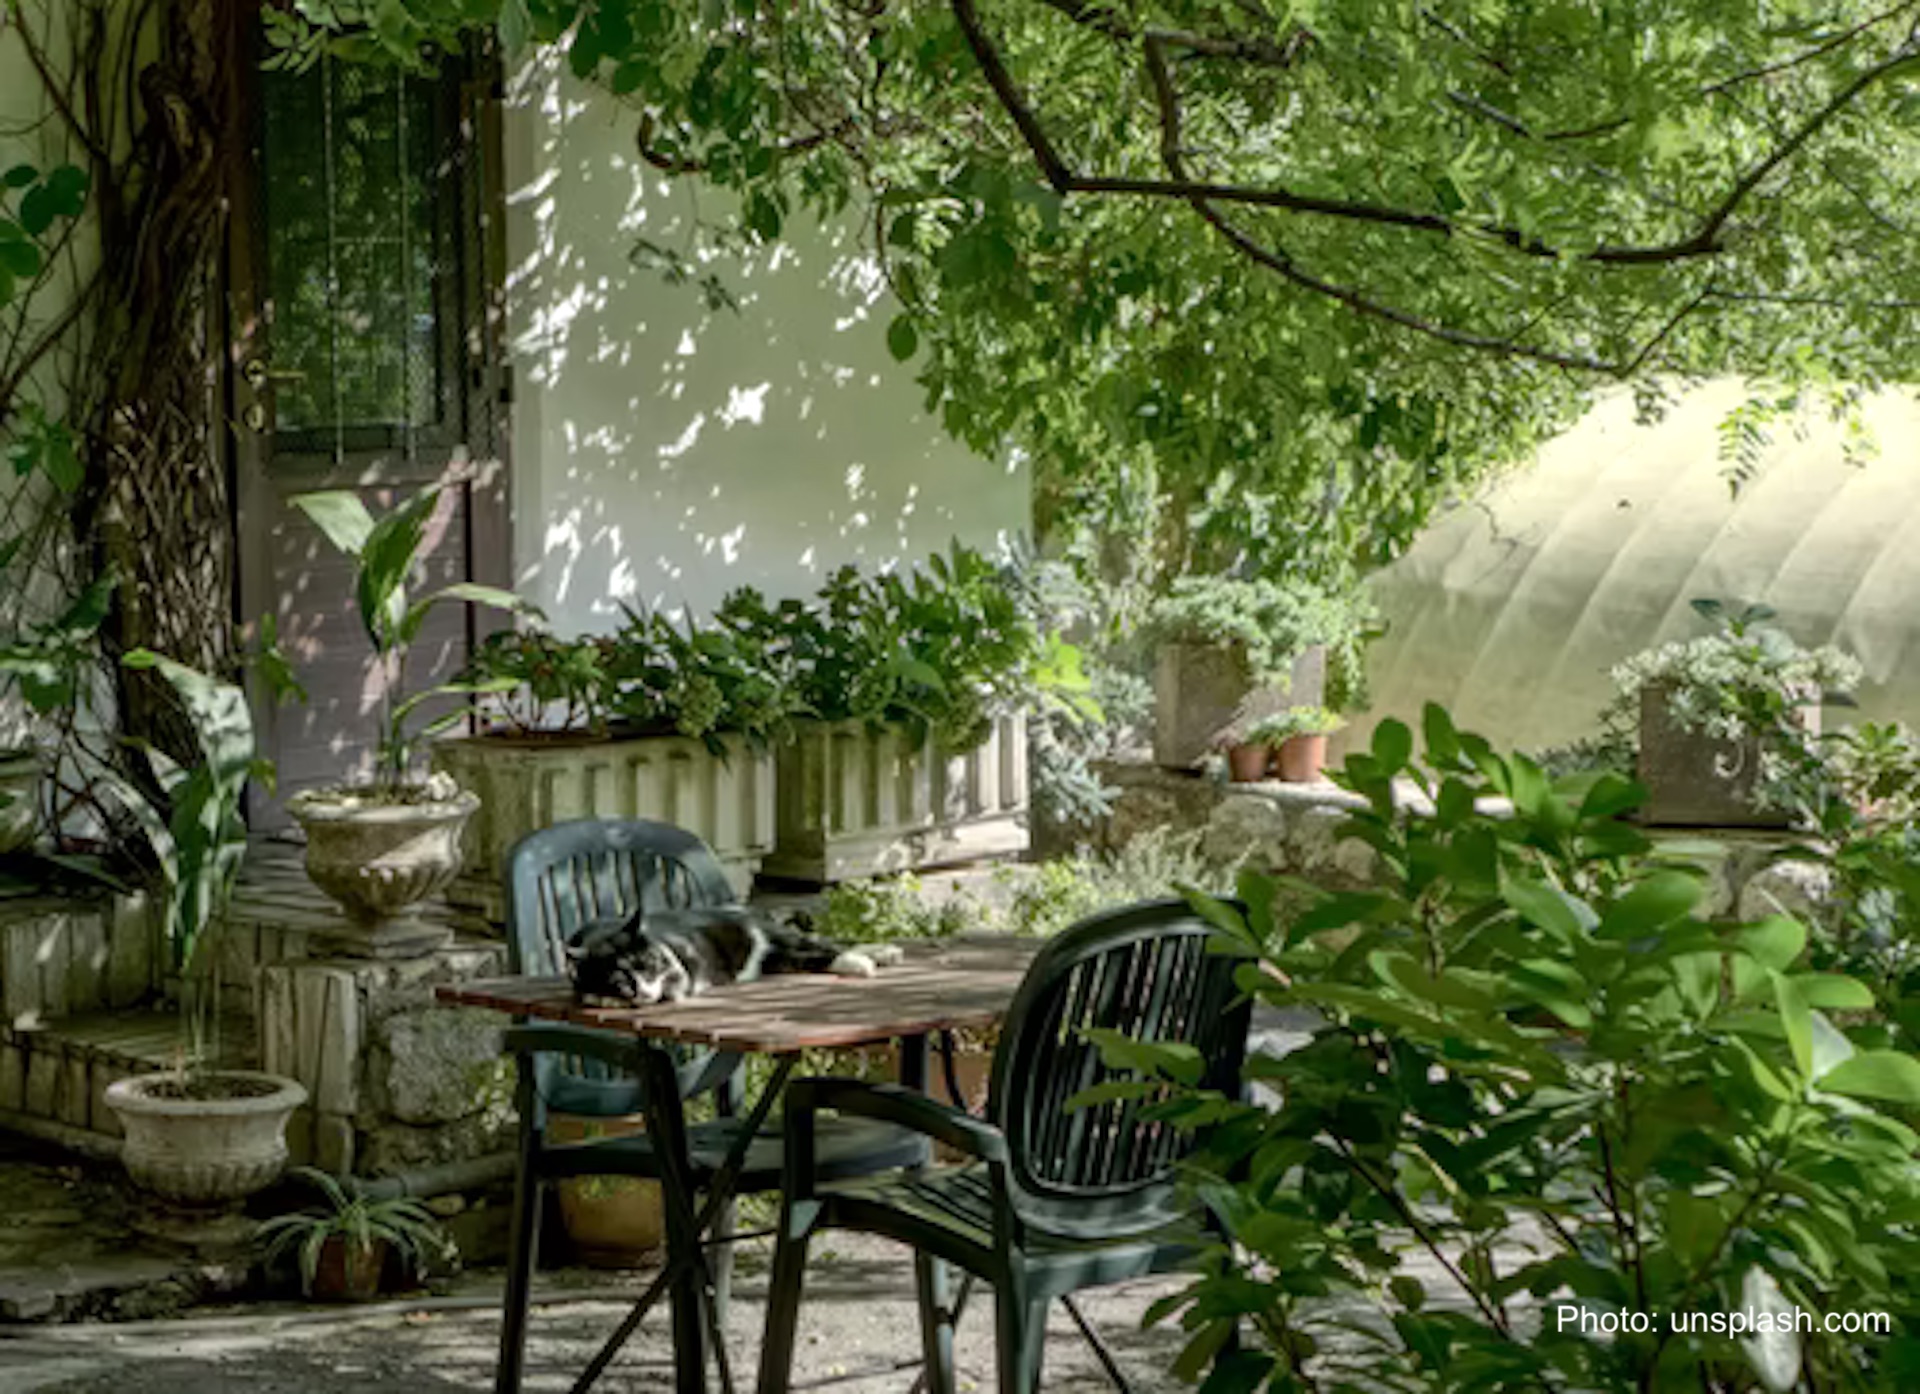 Backyard garden with table and chairs